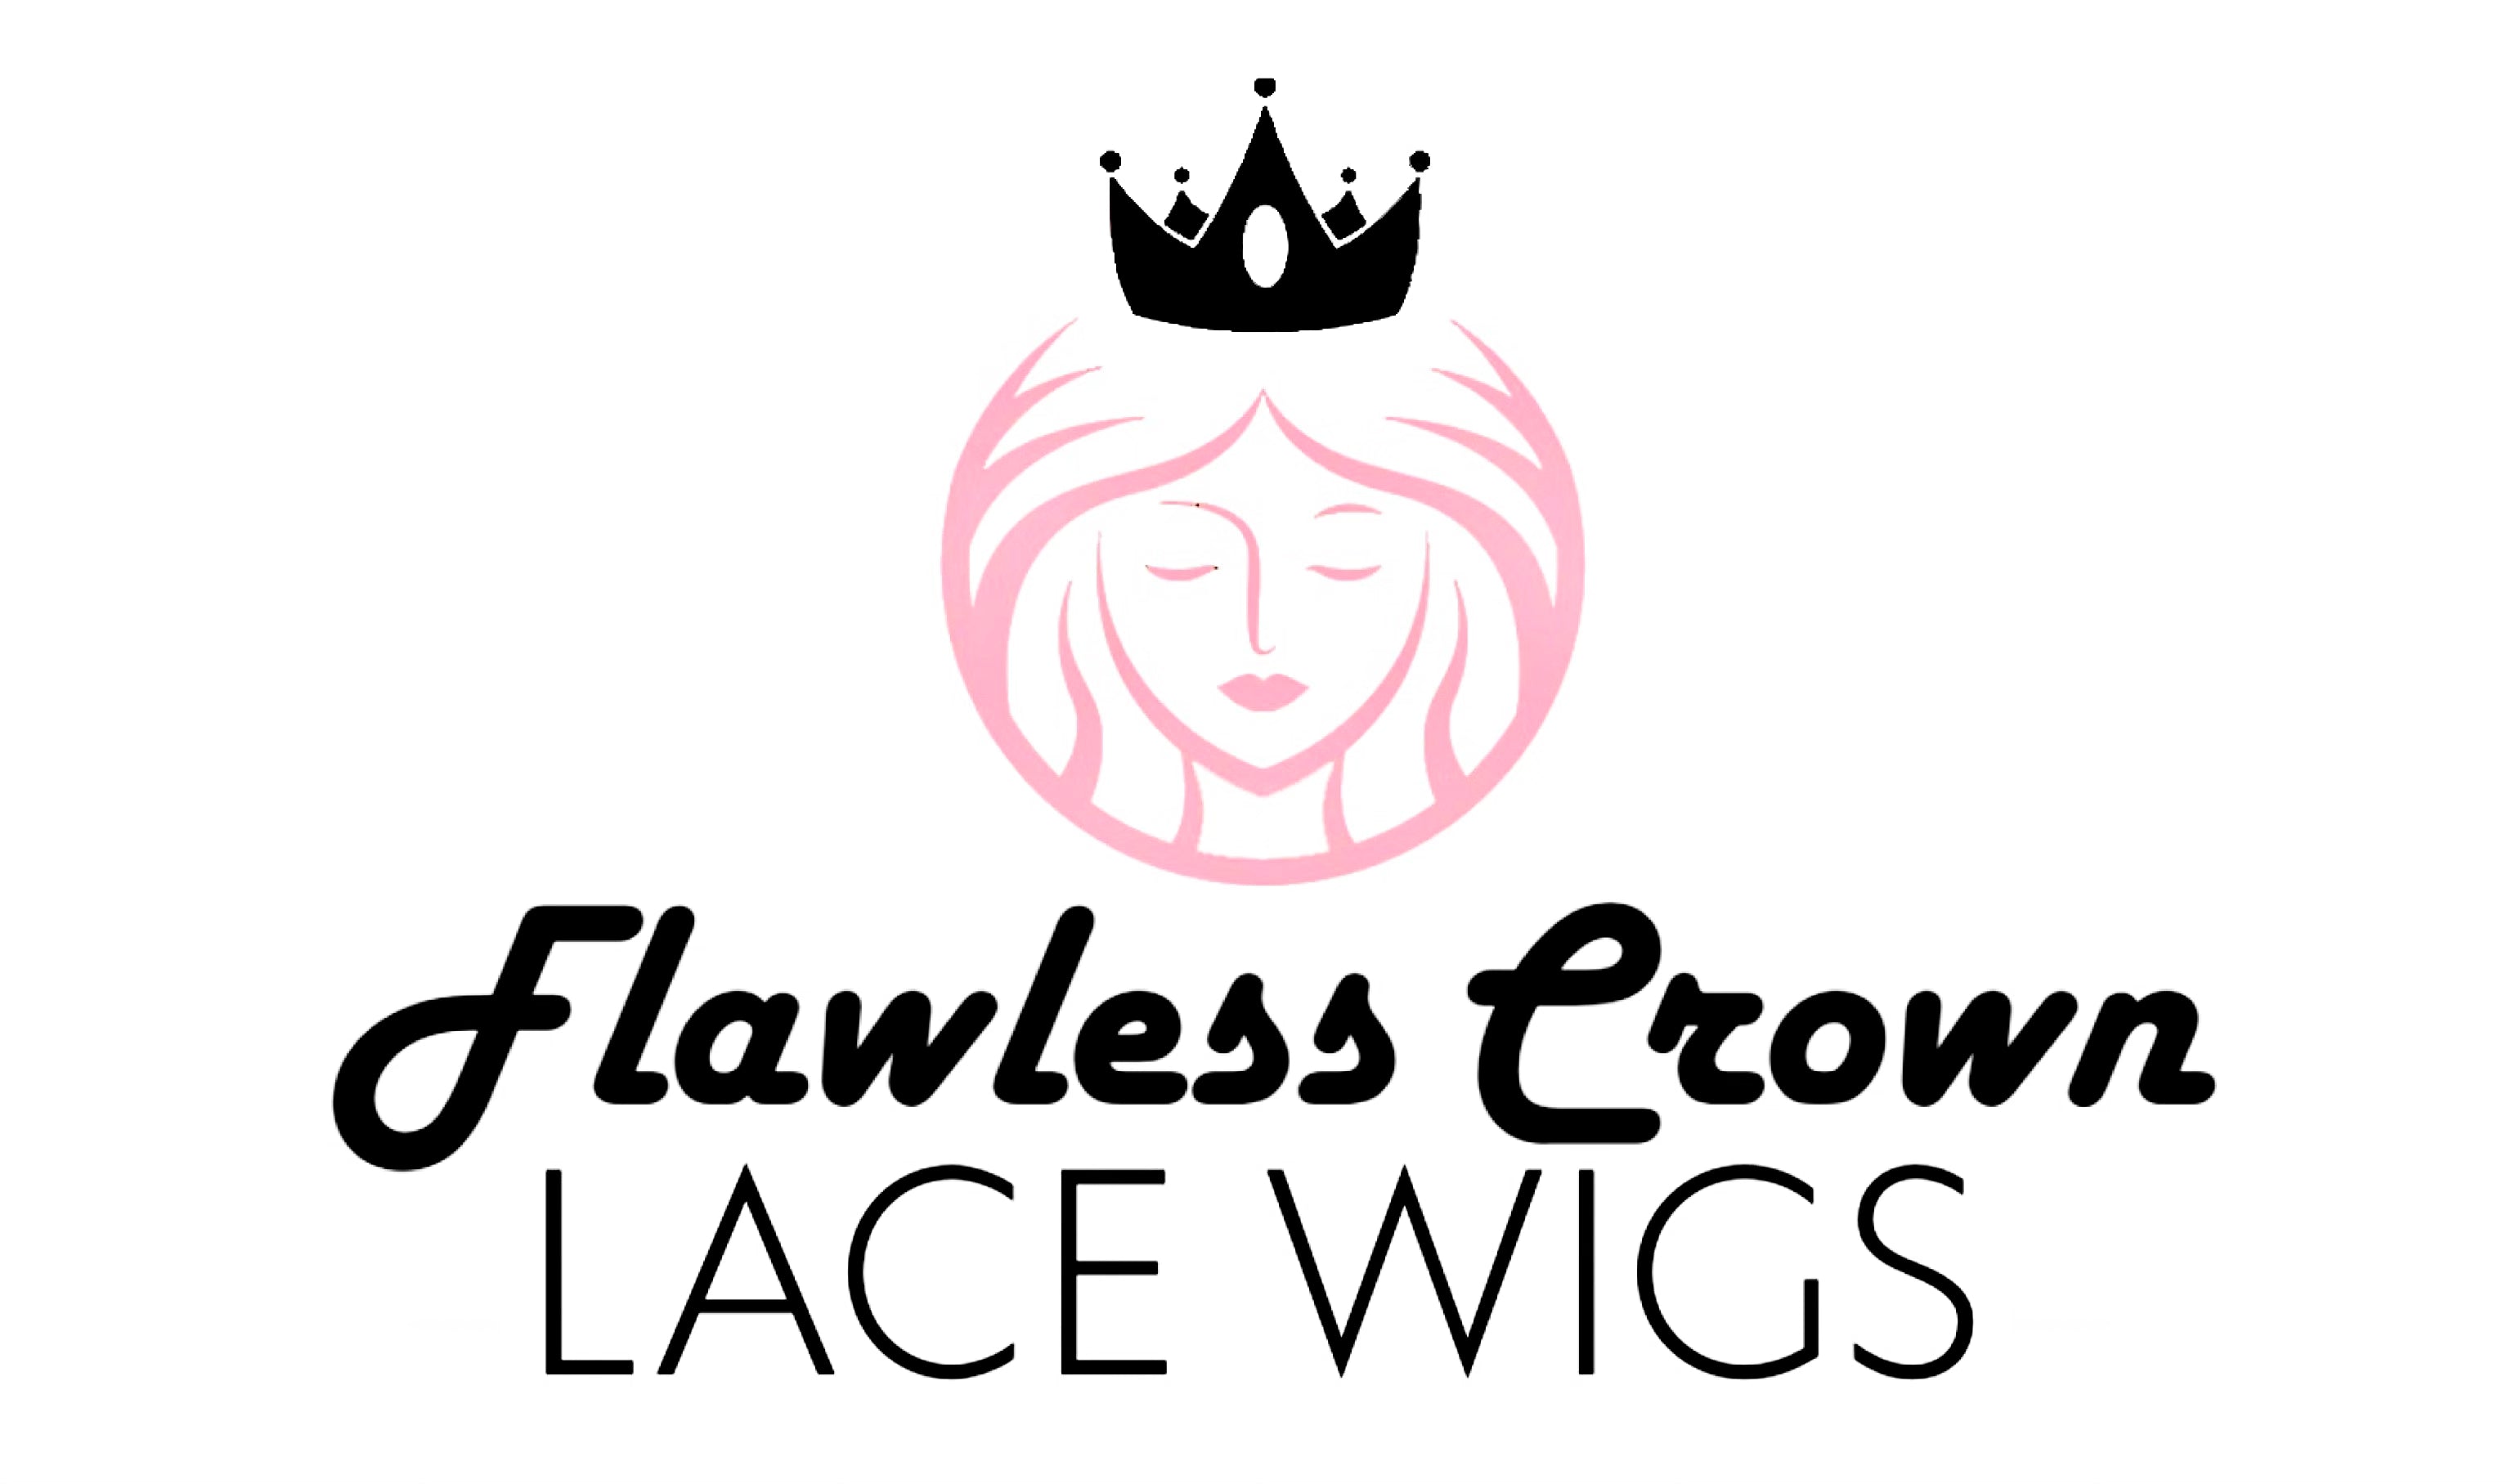 Flawless Crown Lace Wigs